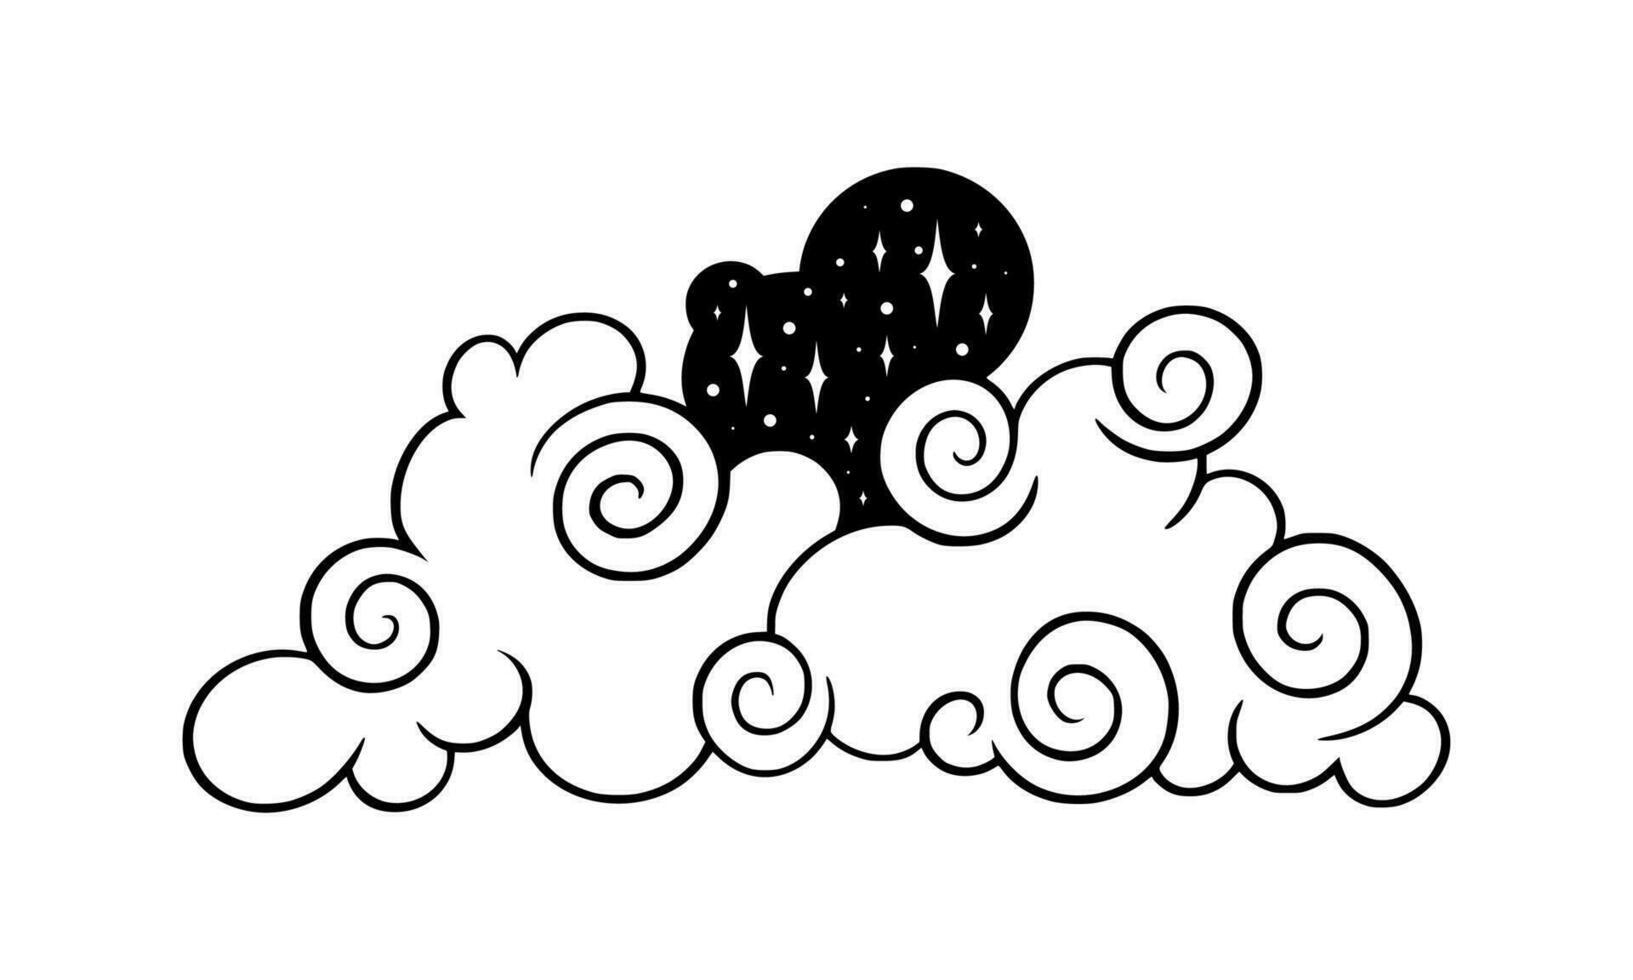 Tarot cloud with stars. Vintage boho cloud for esoteric astrology designs. Vector illustration